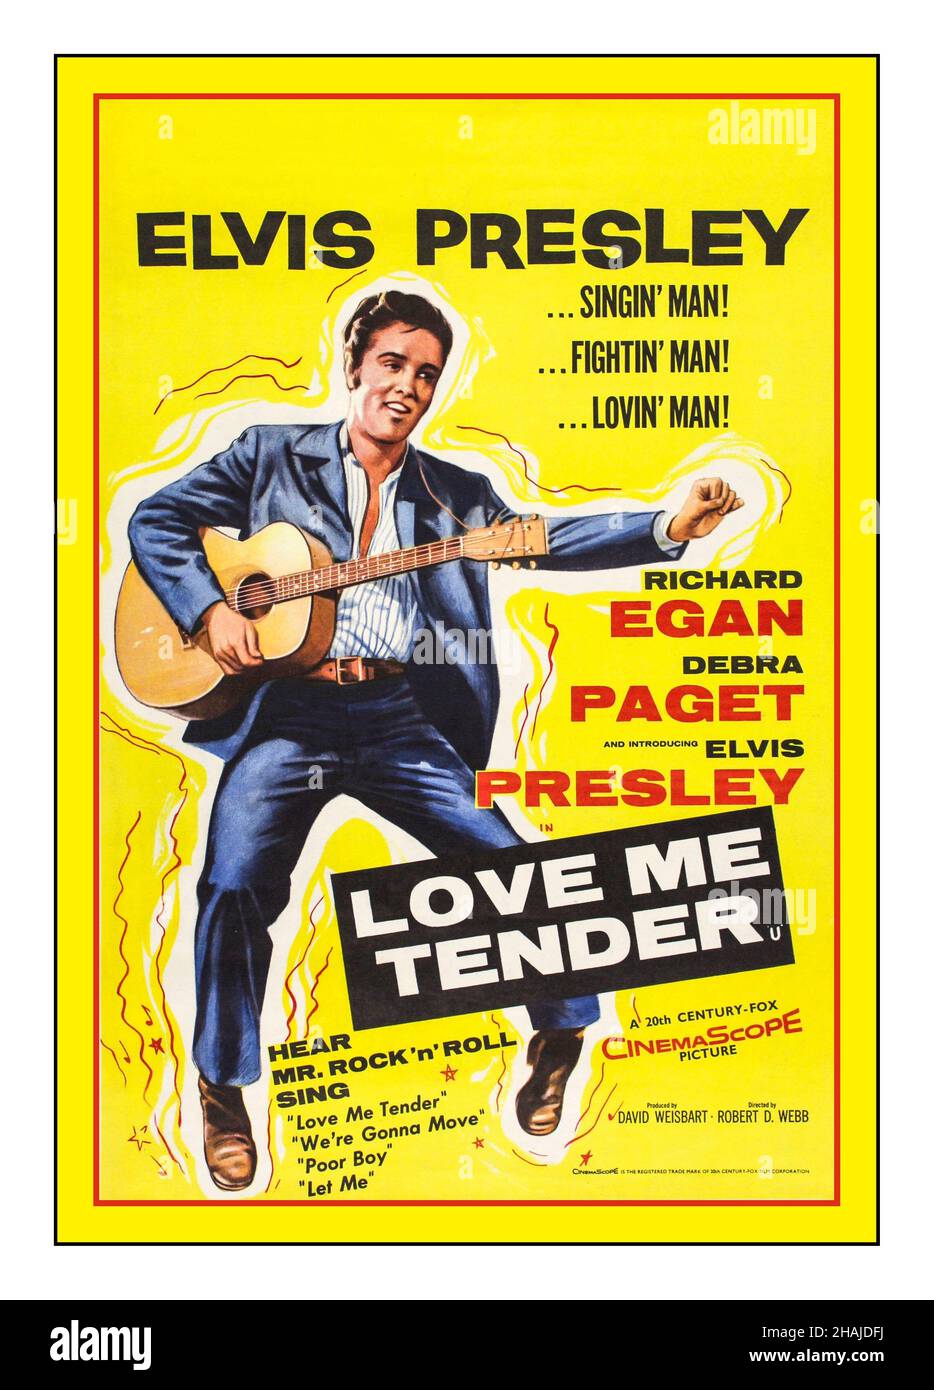 ELVIS PRESLEY Vintage Movie Film Poster 'Love Me Tender  is a 1956 American musical Western film directed by Robert D. Webb, and released by 20th Century Fox on November 15, 1956. The film, named after the song, stars Richard Egan, Debra Paget, and Elvis Presley in his acting debut. As Presley's movie debut, it was the only time in his acting career that he did not receive top billing. Stock Photo